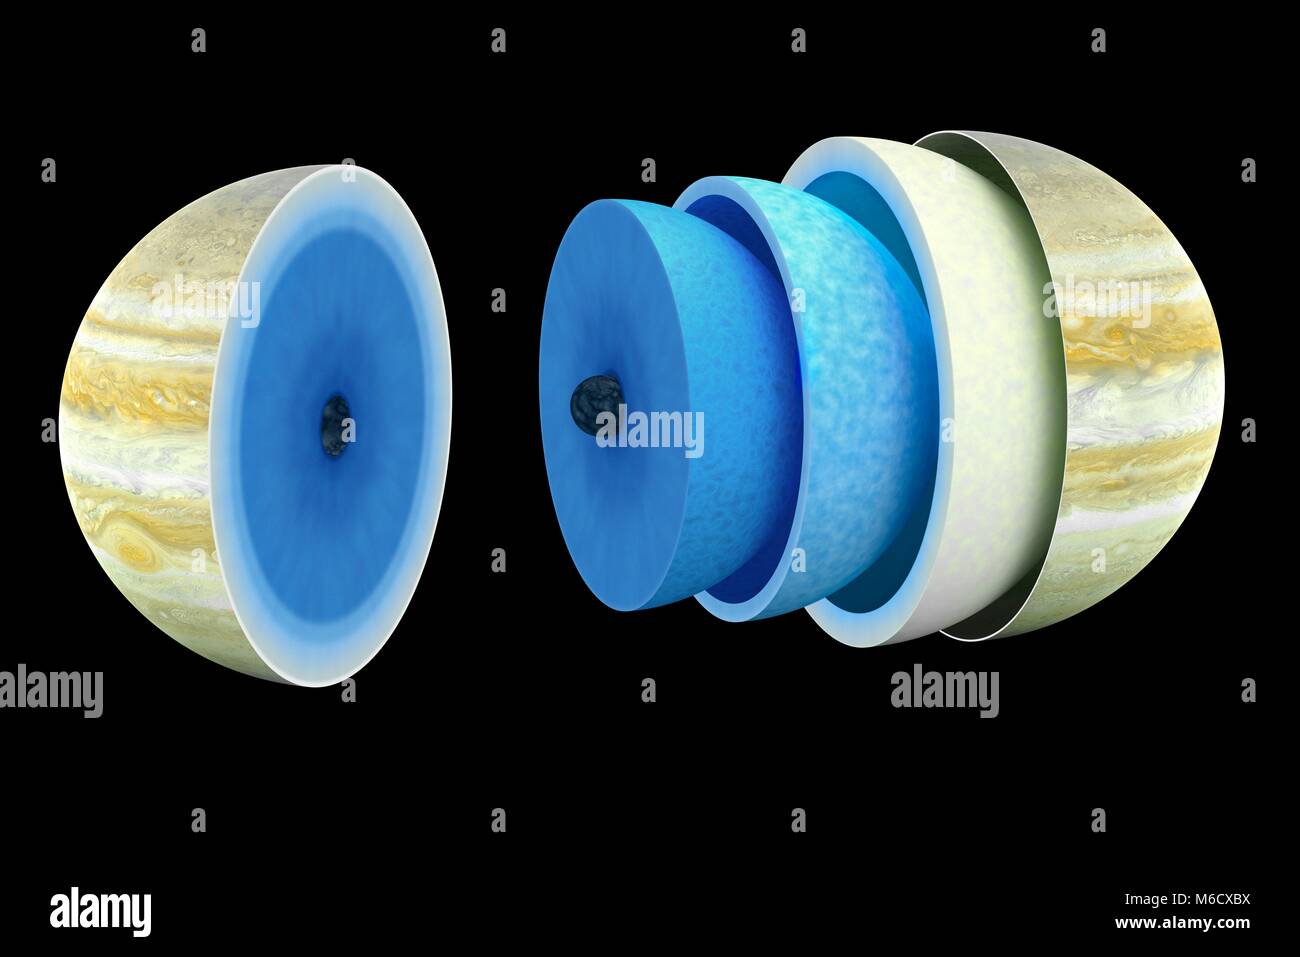 Diagram showing the theoretical interior of the gas giant planet Jupiter. At the centre there is probably a rocky and icy core several times the mass of the Earth. This is surrounded by an extensive inner mantle, more than two-thirds of the planet's total radius, of liquid metallic hydrogen under great pressure. On top of this is the shell of helium-neon 'rain'. Then comes the outer mantle, a layer of liquid molecular hydrogen and helium. And finally comes an extensive hydrogen-helium atmosphere about 1000 km thick. Stock Photo